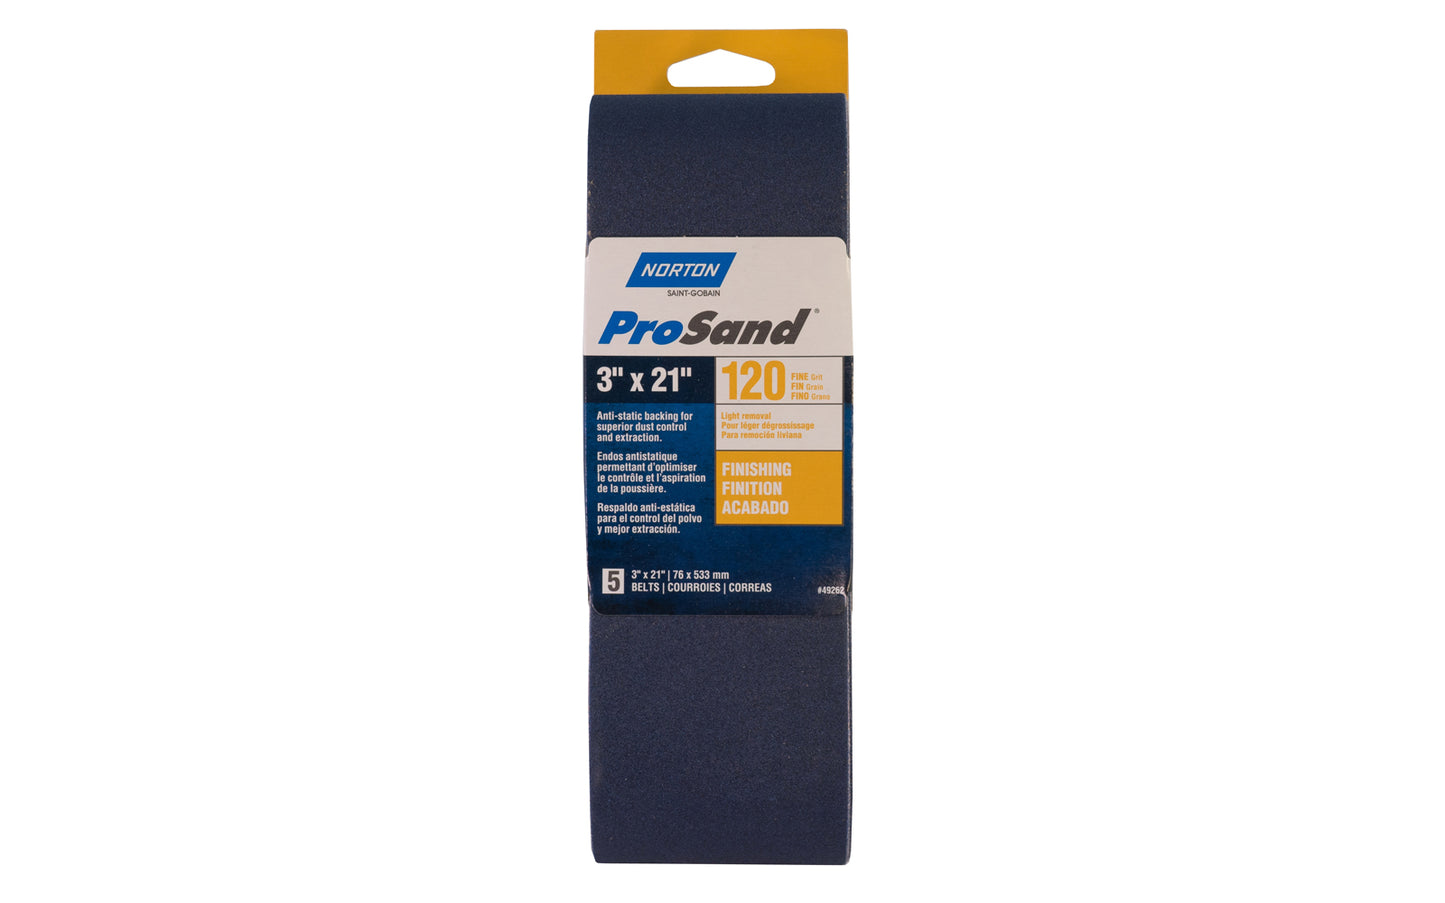 Norton "ProSand" 3" x 21" Sanding Abrasive Belts - 120 Grit. Pro Sand Zirconia Alumina Abrasive Sanding Belts. Anti-static backing for superior dust control & extraction. For heavy stripping & removal. 5 Pack. Made in USA. Model 49262